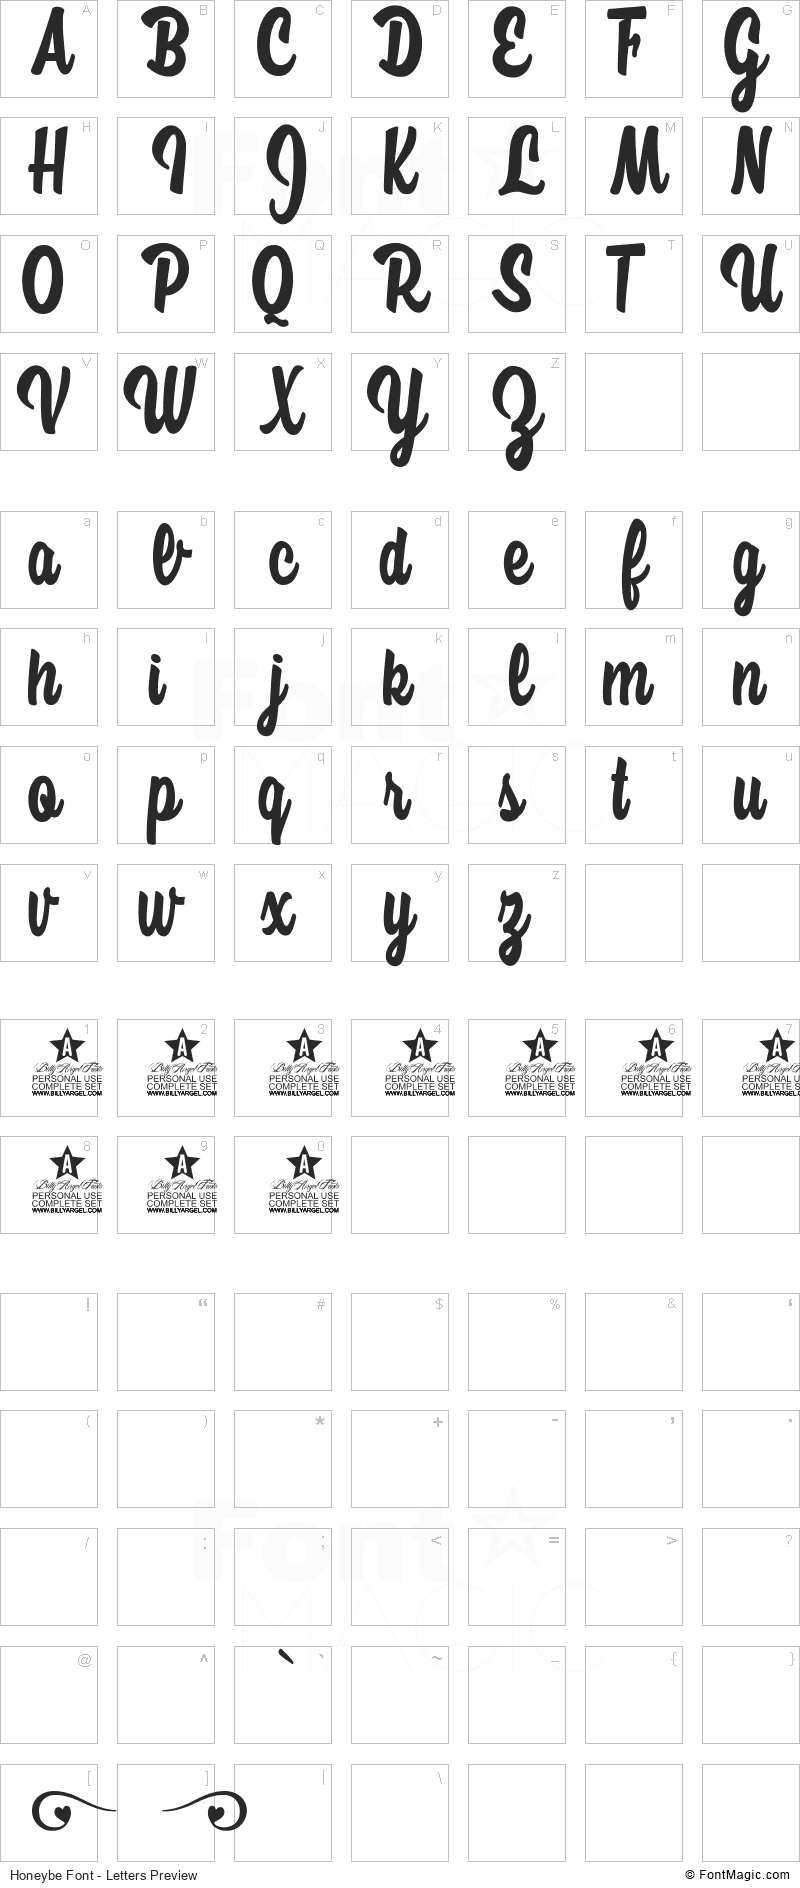 Honeybe Font - All Latters Preview Chart